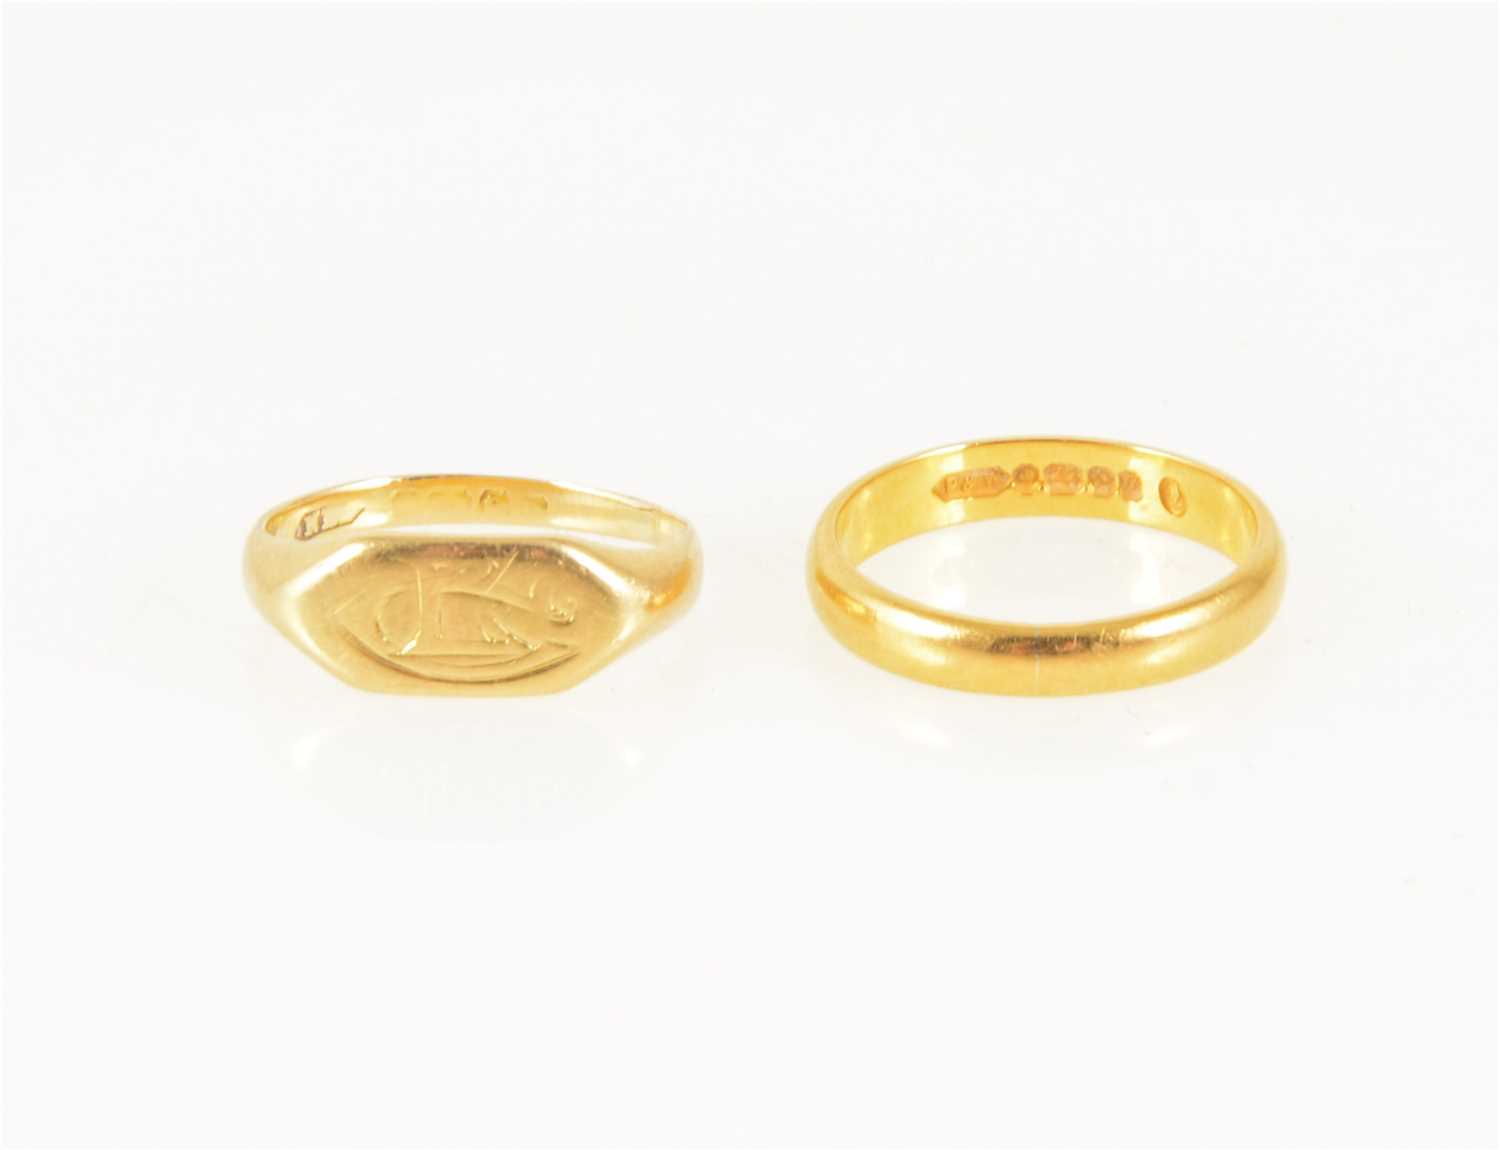 Lot 179 - A 22 carat gold wedding band, 3mm wide D shape, approximate weight 3.2gms, ring size K, a gold signet ring probably 18 carat, 3gms., size H.